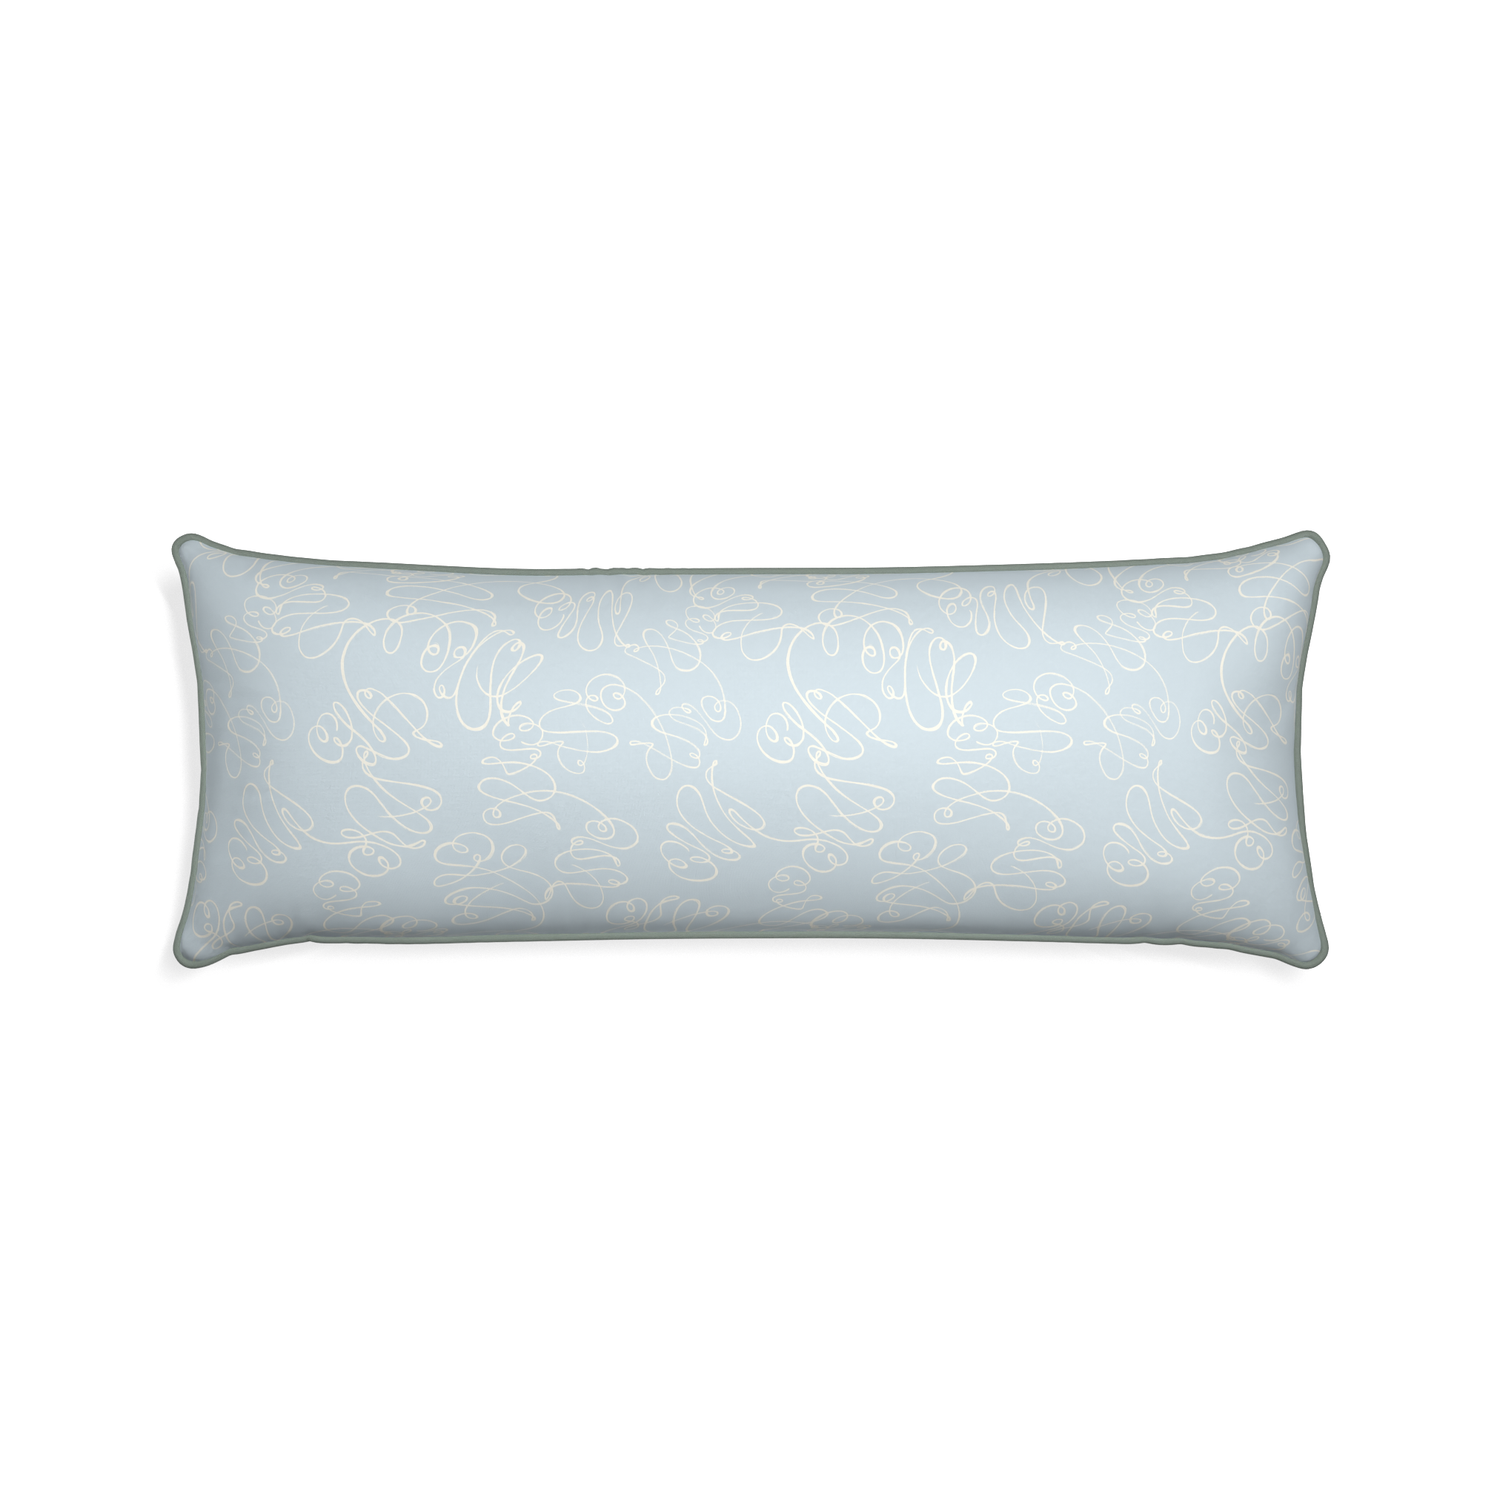 Xl-lumbar mirabella custom powder blue abstractpillow with sage piping on white background